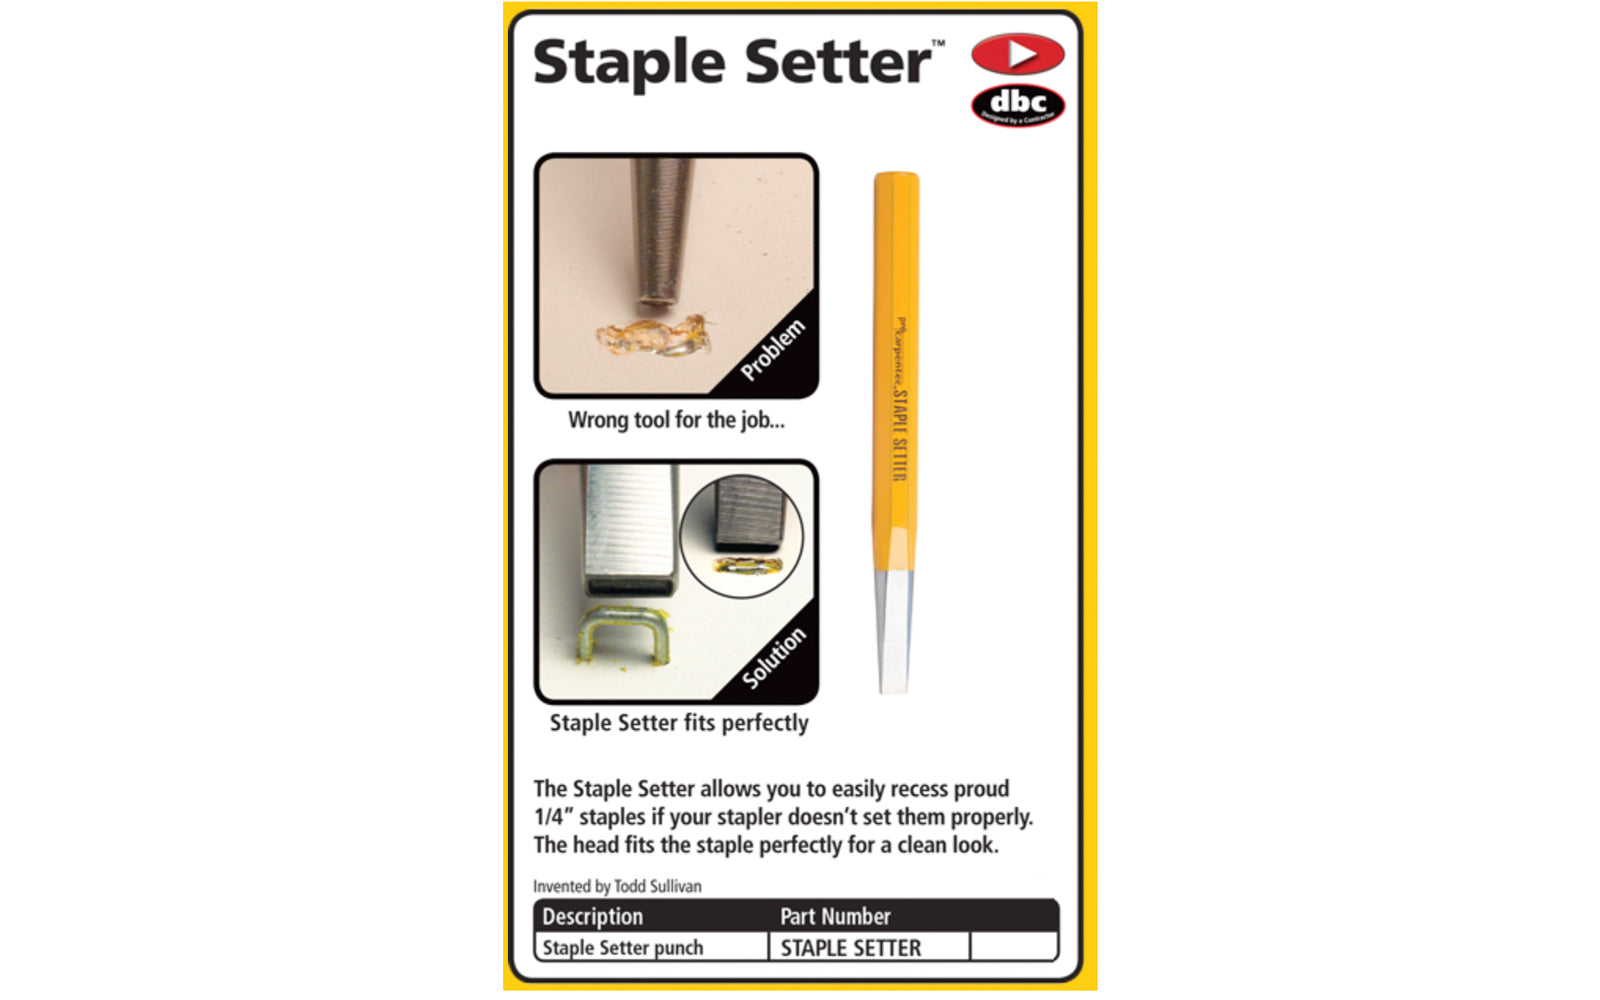 FastCap Staple Setter Punch Tool - Easily recess 1/4" staples - Recess crown staples perfectly at 1/16" below the surface